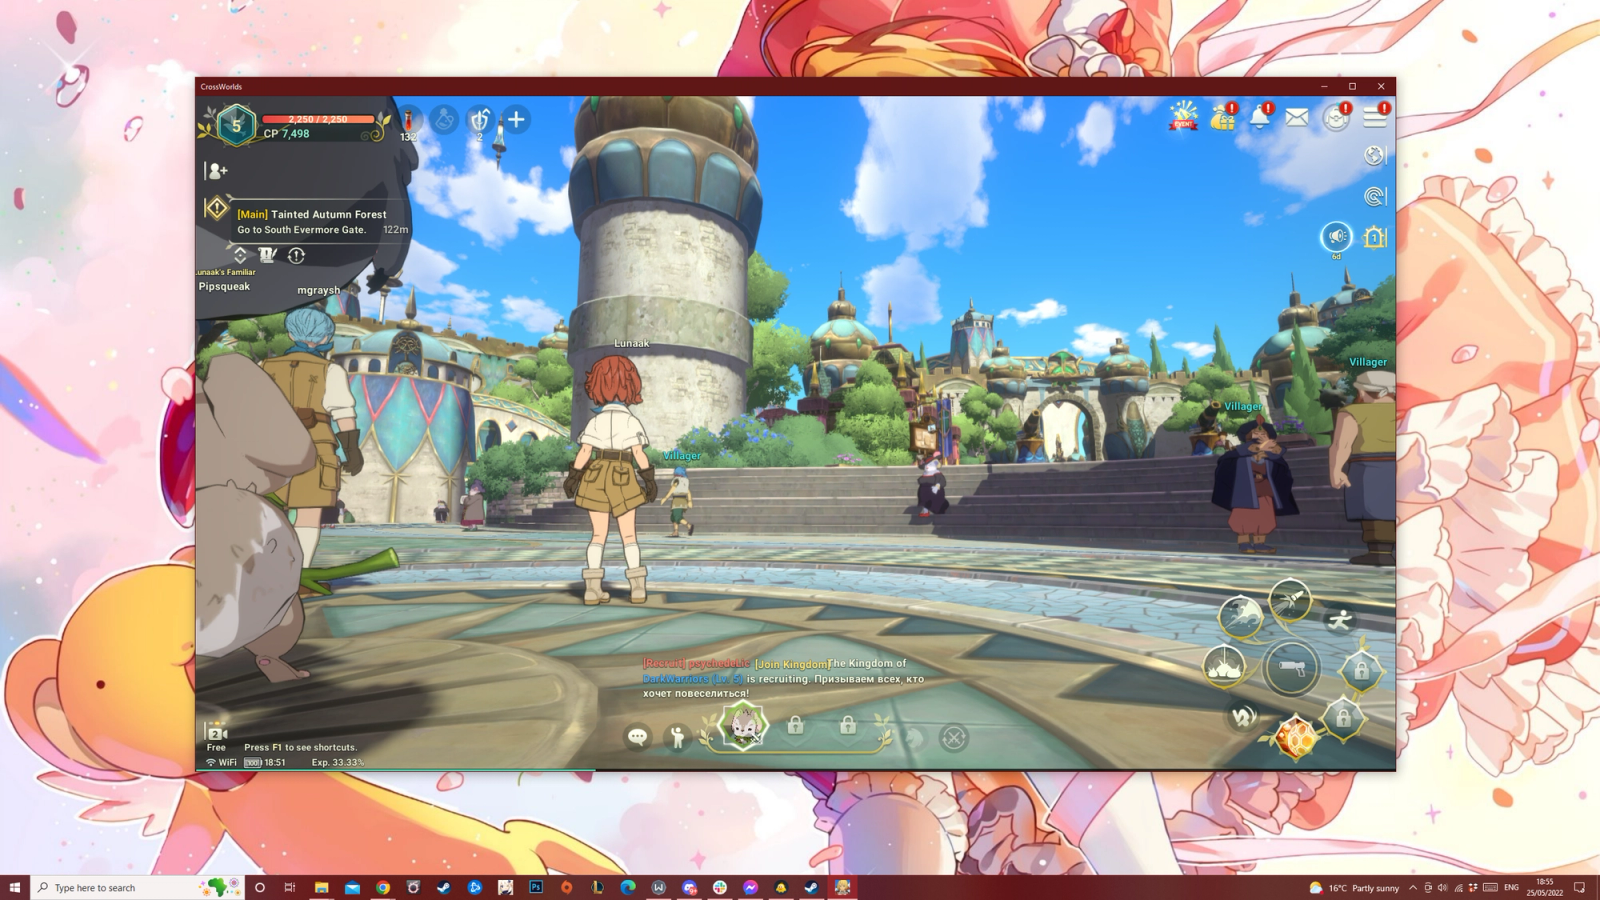 Ni No Kuni: Cross Worlds PC looks better and doesn't risk damaging your phone's battery over prolonged use.